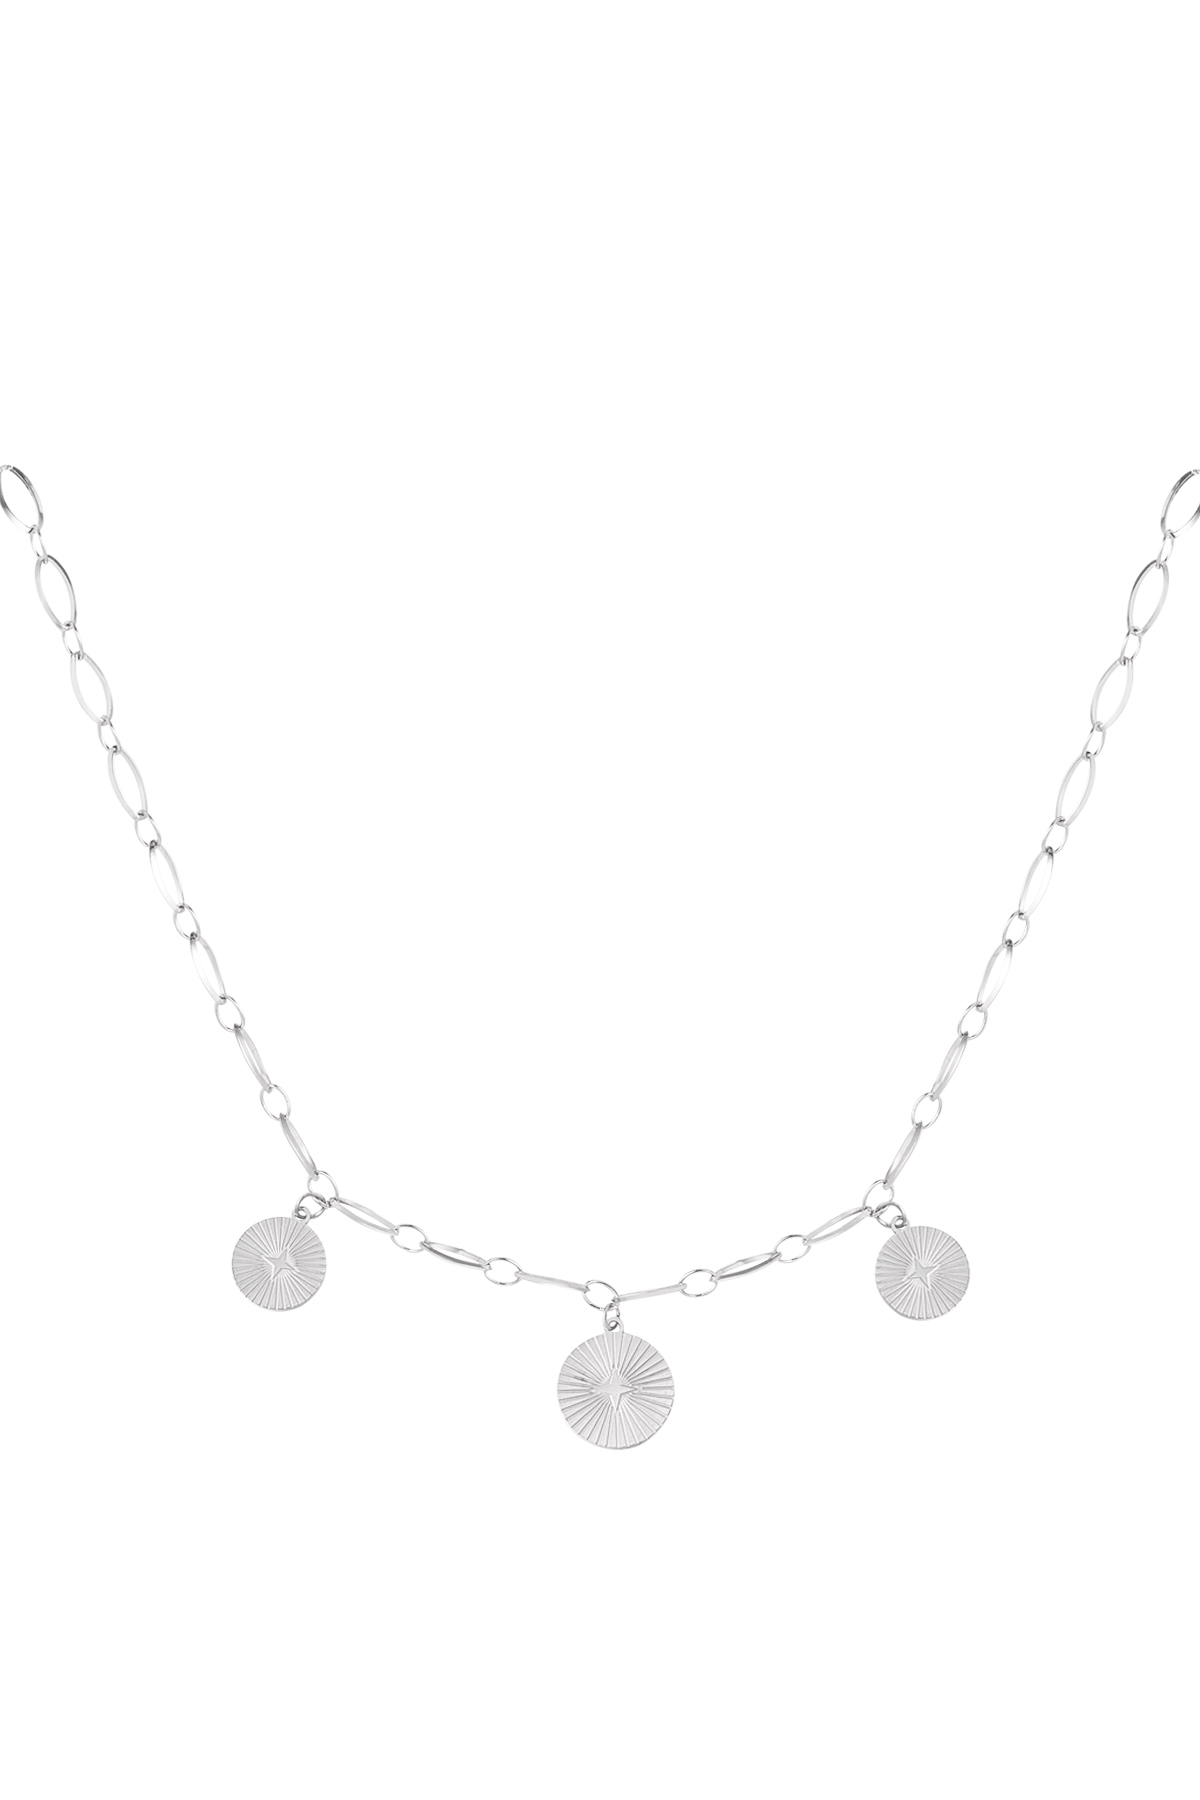 Ketting drie coins - zilver h5 